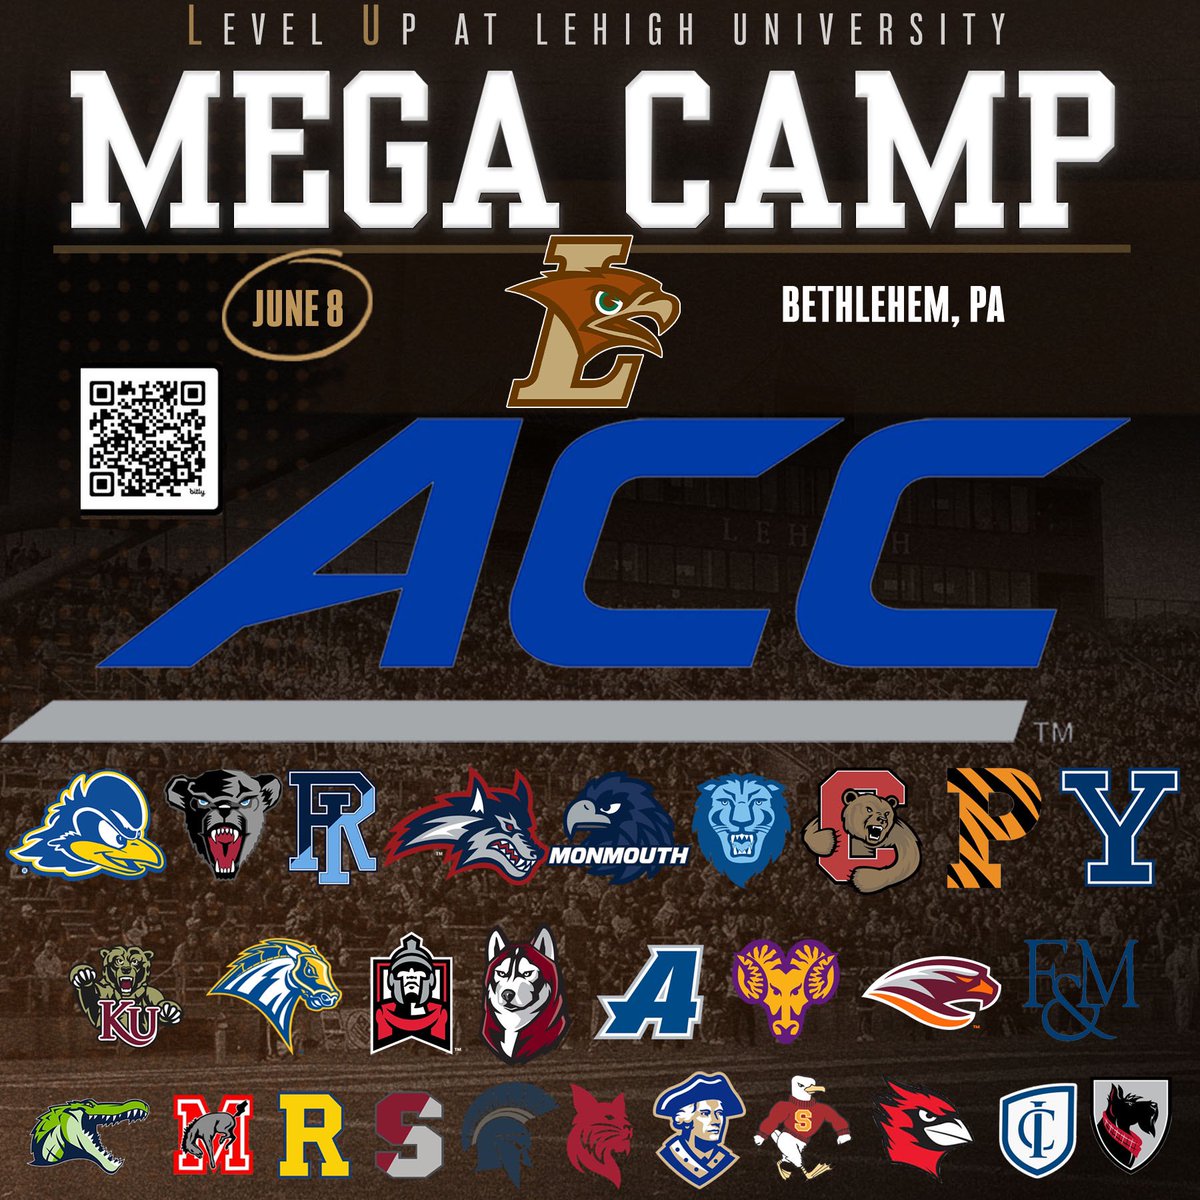 New schools being added!!! ACC, C-USA, CAA, IVY, DII, and DIII! Come earn your spot and compete on the mountain ⛰️ 🏔️🏔️